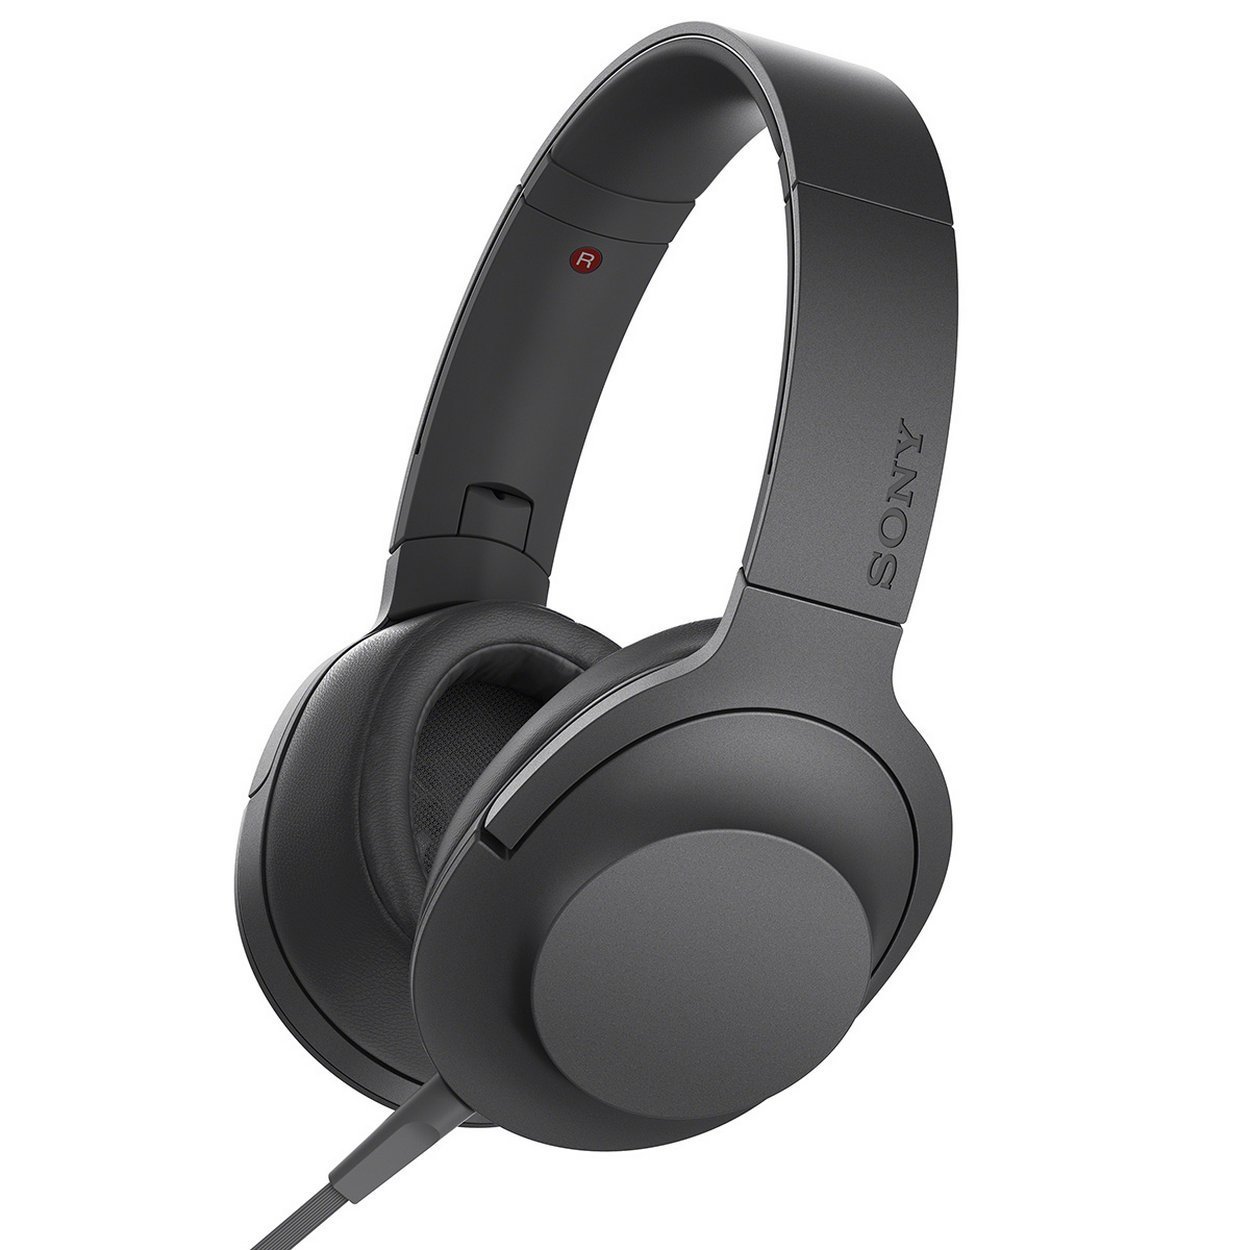 Sony h.ear on Premium Hi-Res Stereo Headphones（wired）、Charcoal Black